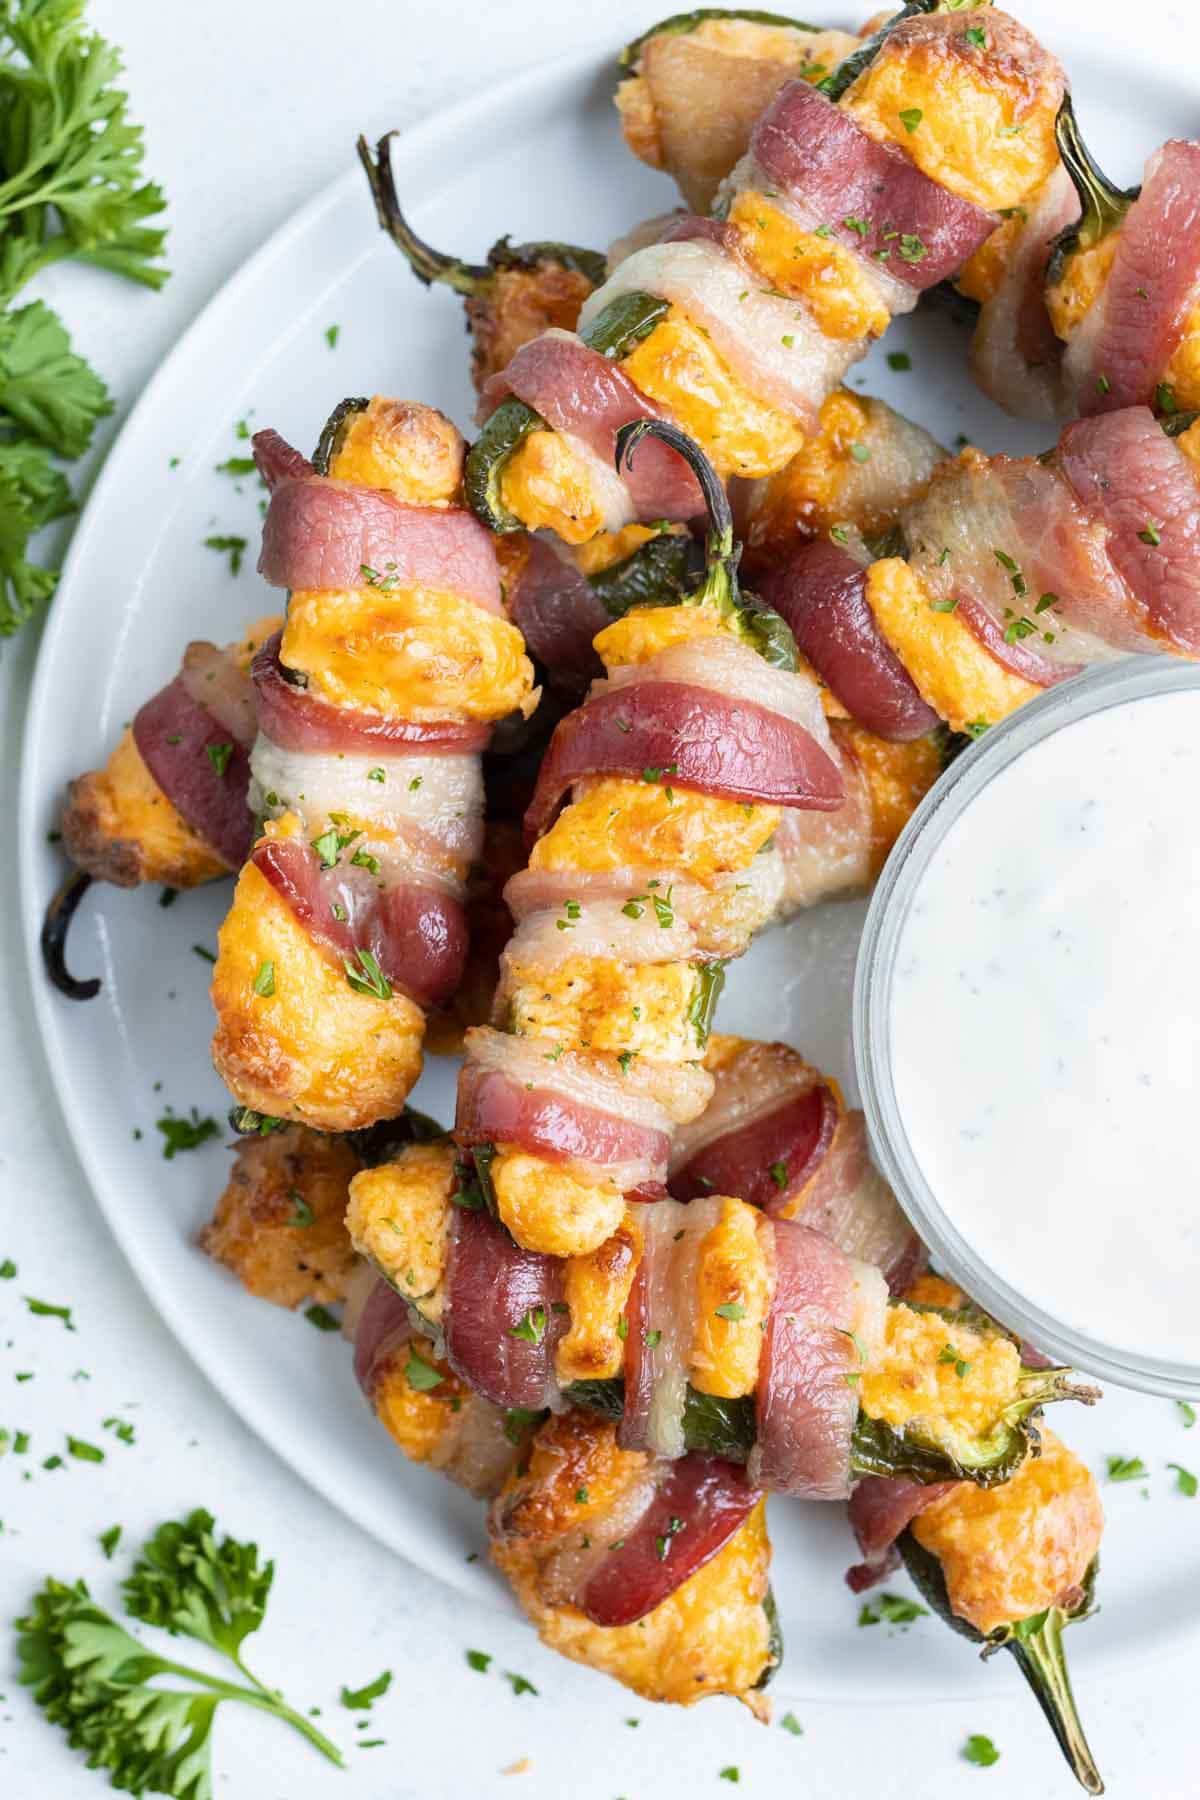 Ranch is served with these easy, low-carb bacon wrapped jalapeno poppers.